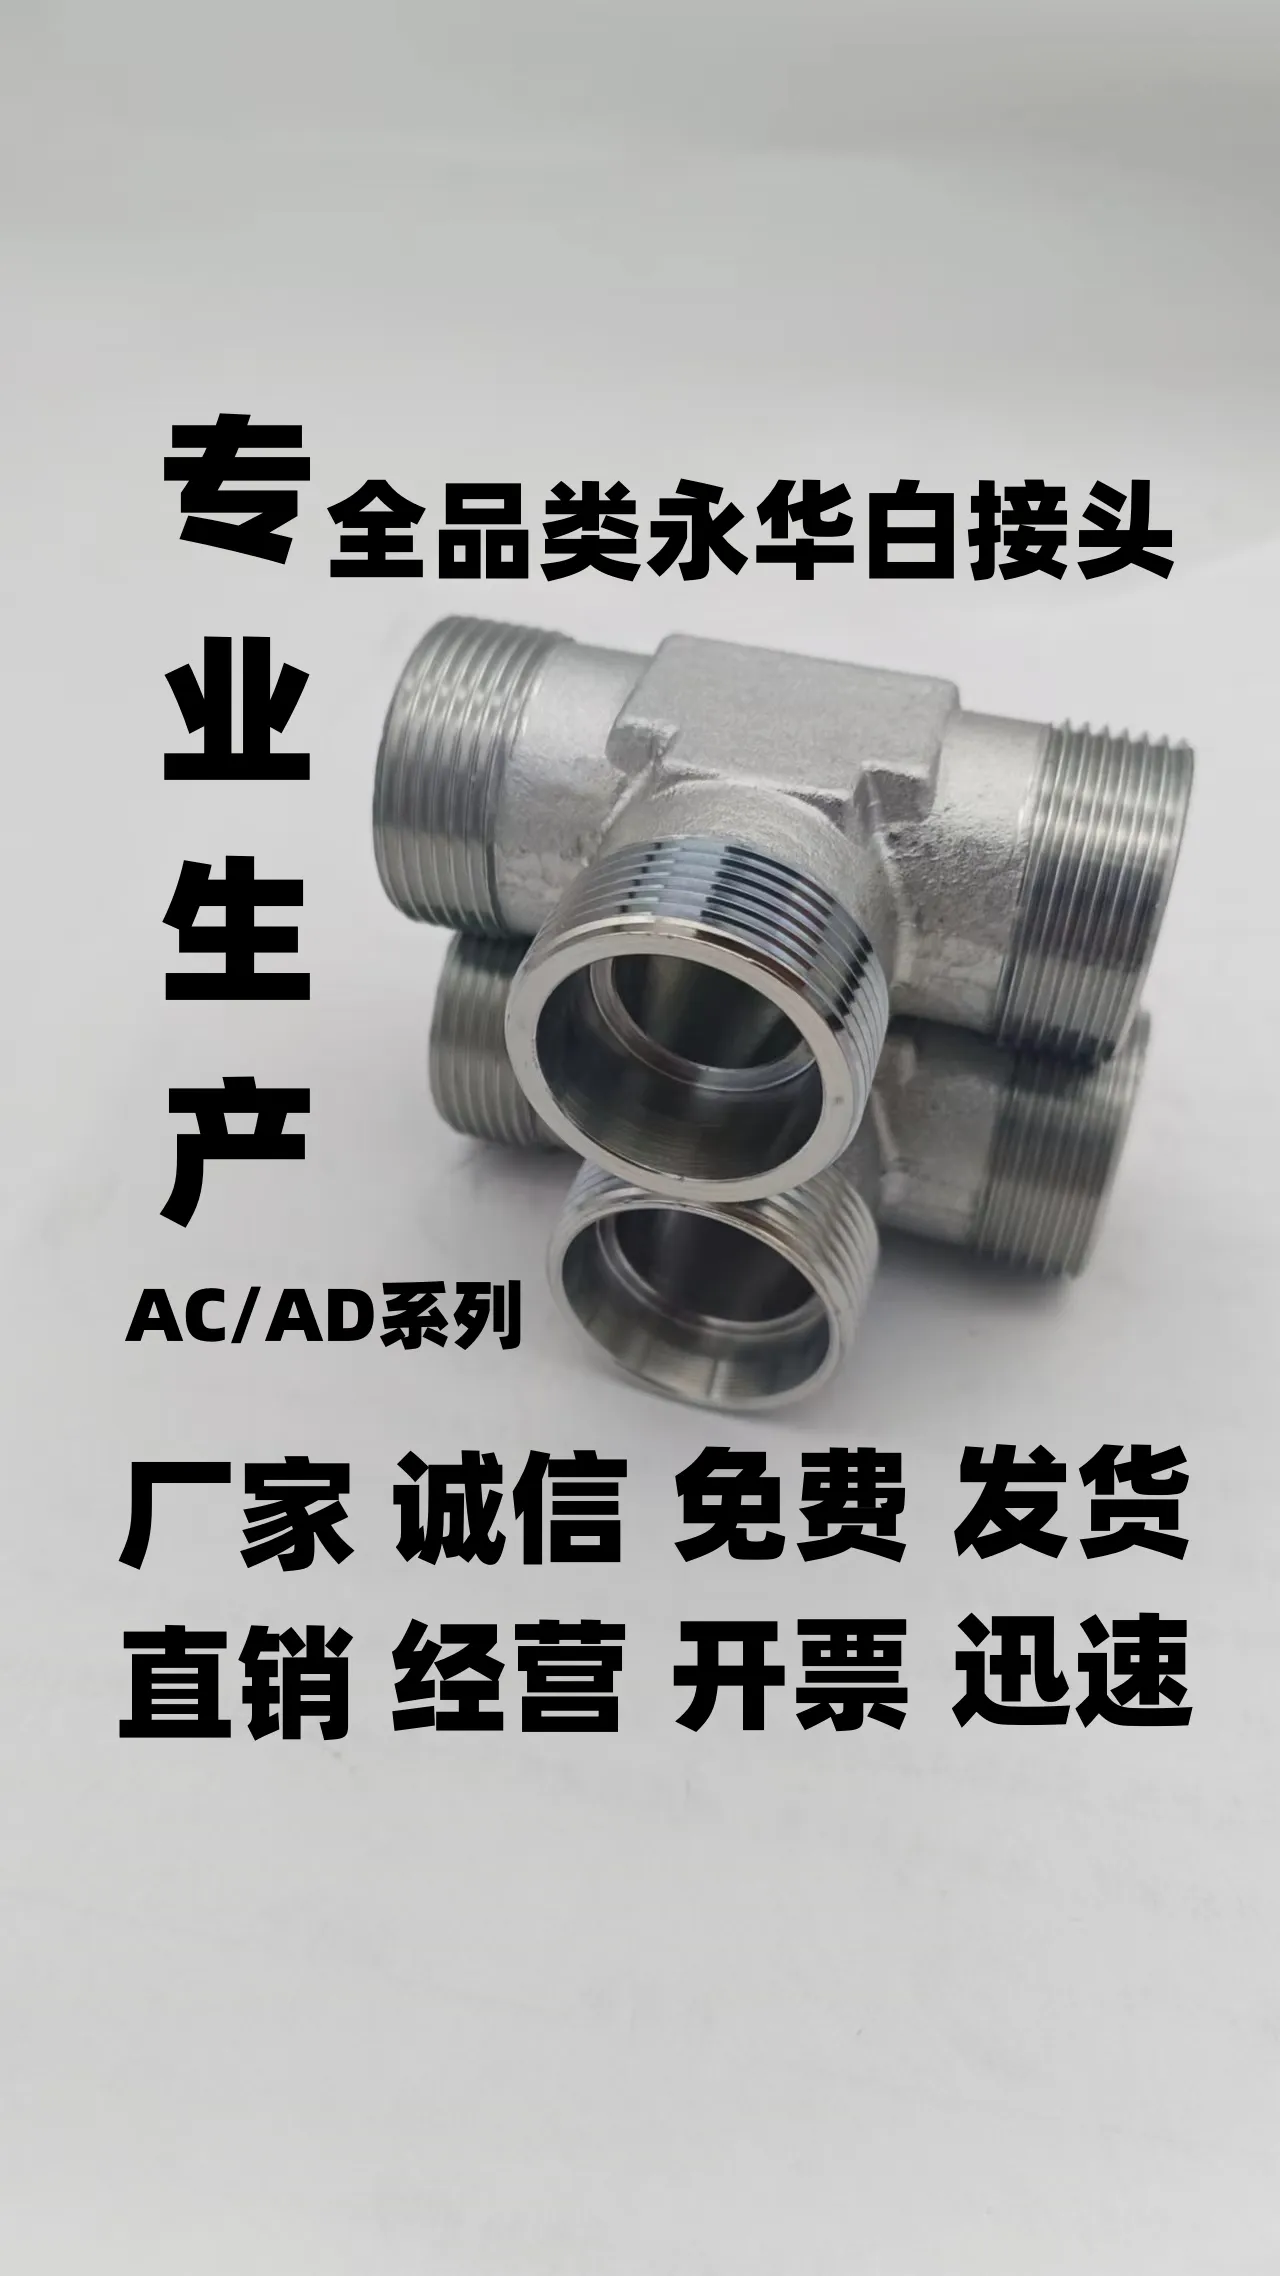 Standard Carbon Steel Ferrule Tee Ac Light Ad Heavy Duty Oil Pipe Hydraulic High Pressure Transition Pipe Joint